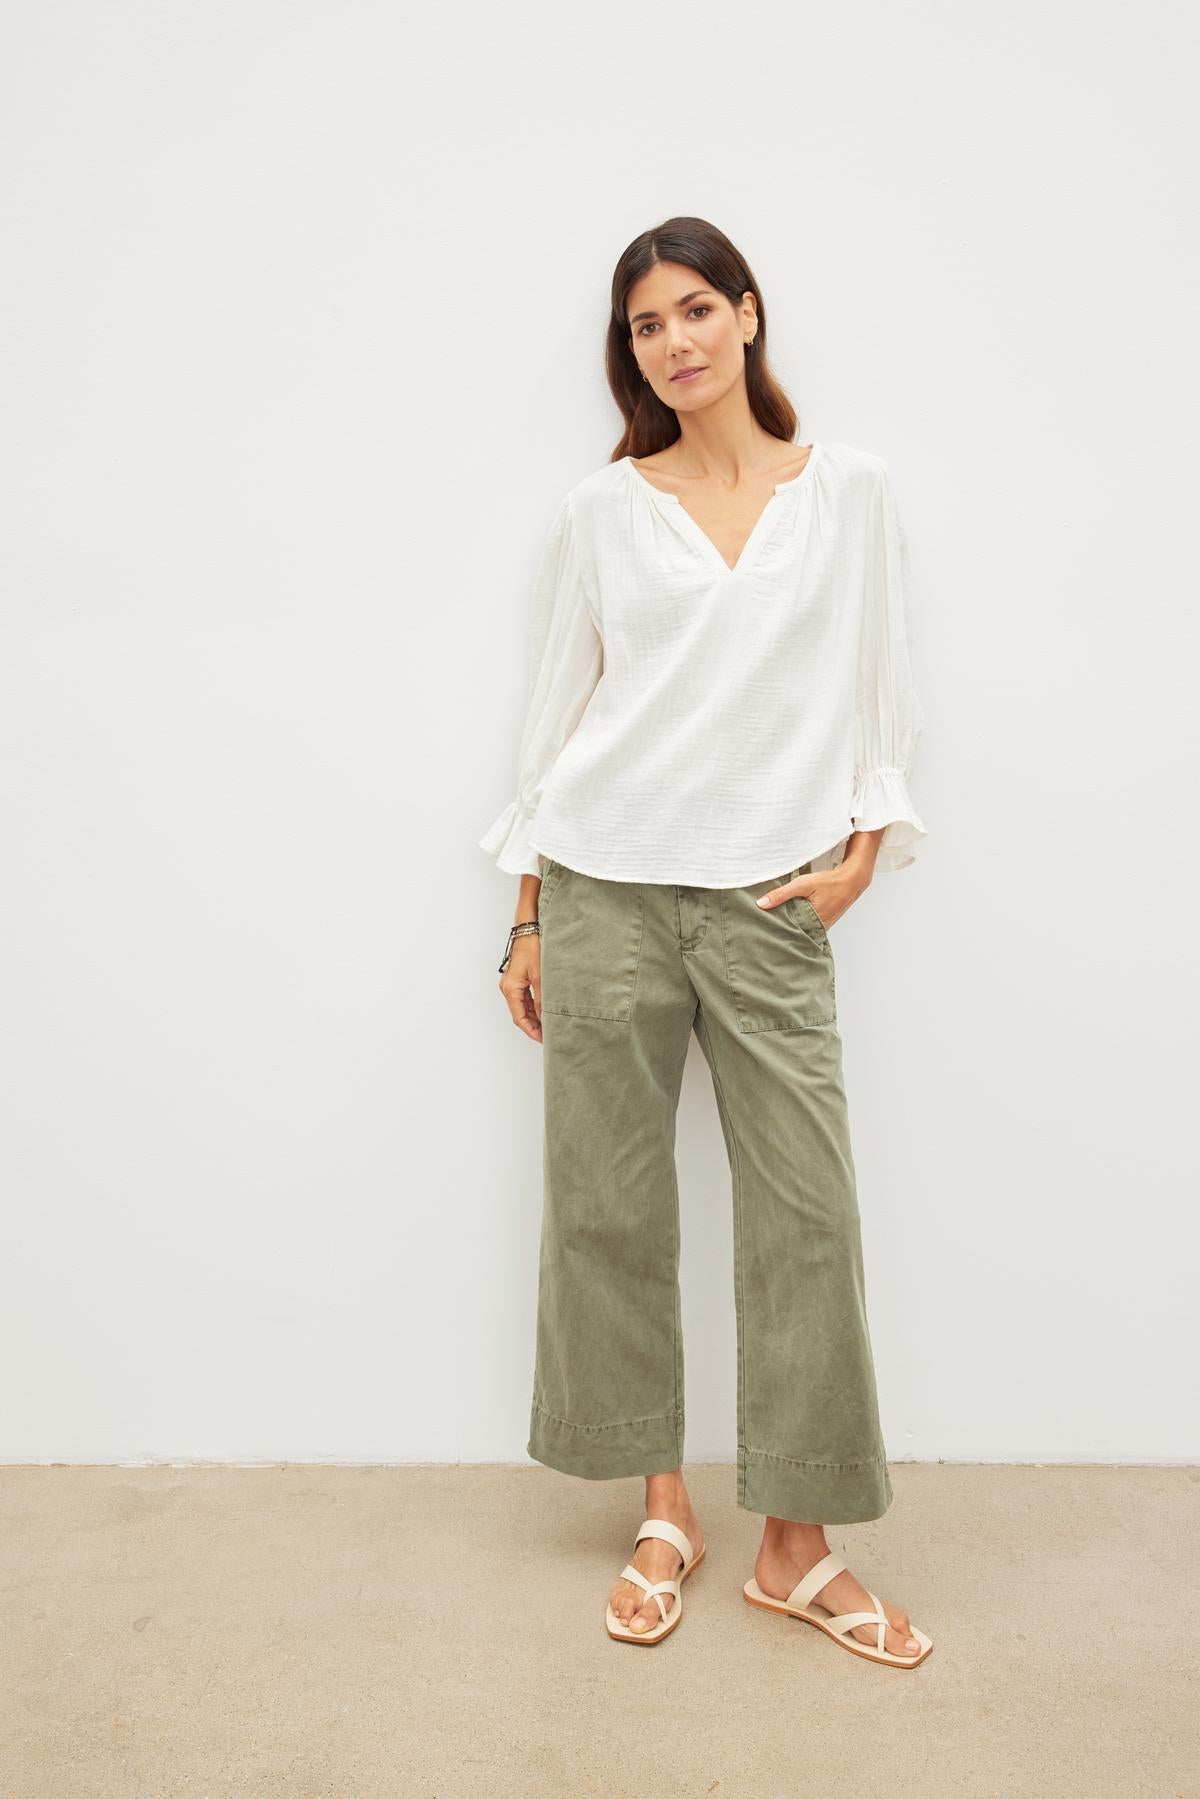 MILLY COTTON GAUZE PEASANT TOP IN COCONUT